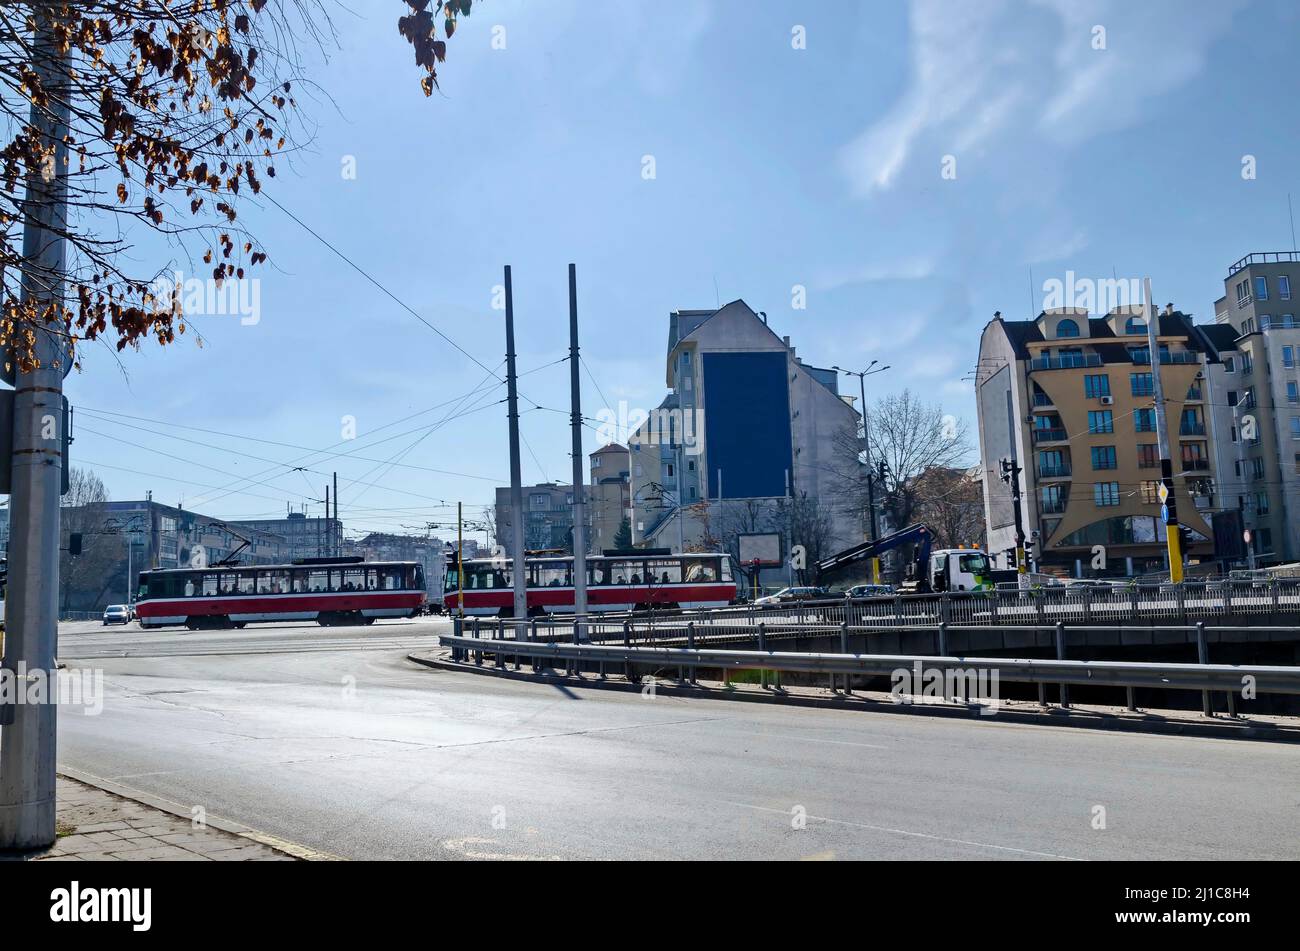 Fragment of urban infrastructure with tram route, subway and street, Sofia, Bulgaria Stock Photo